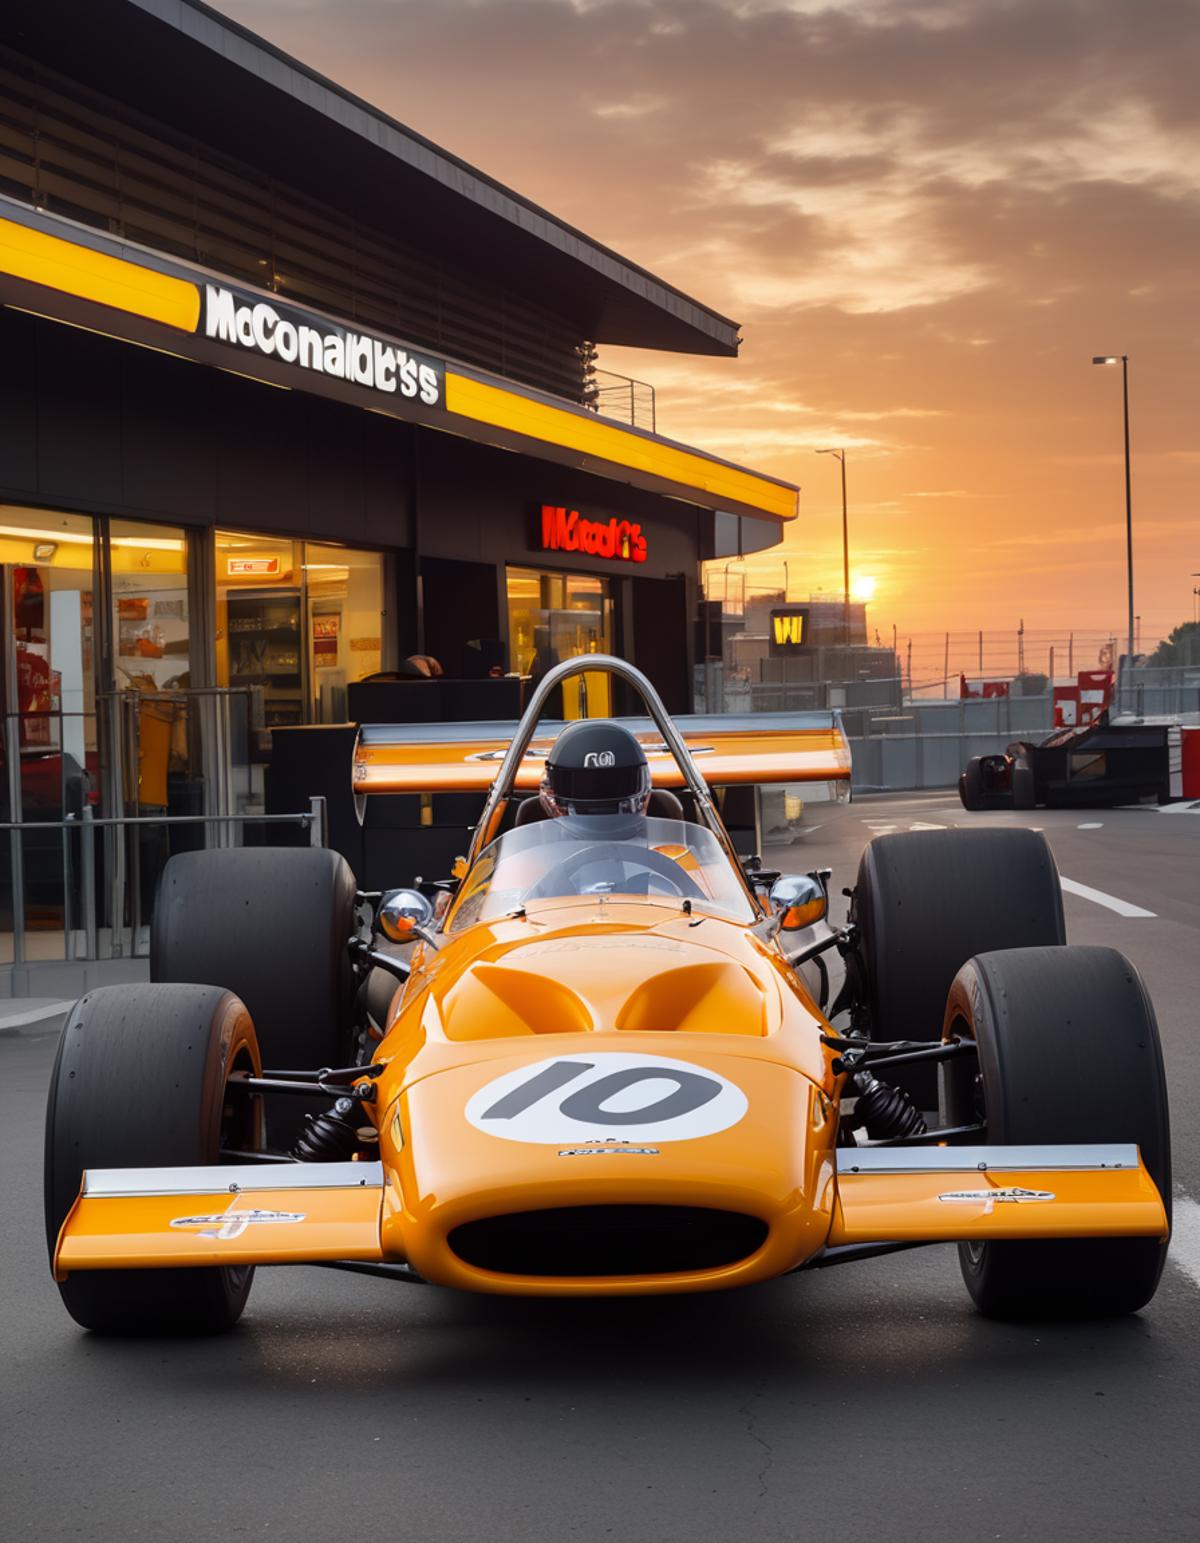 McLaren M14A Formula One (1970) image by pam